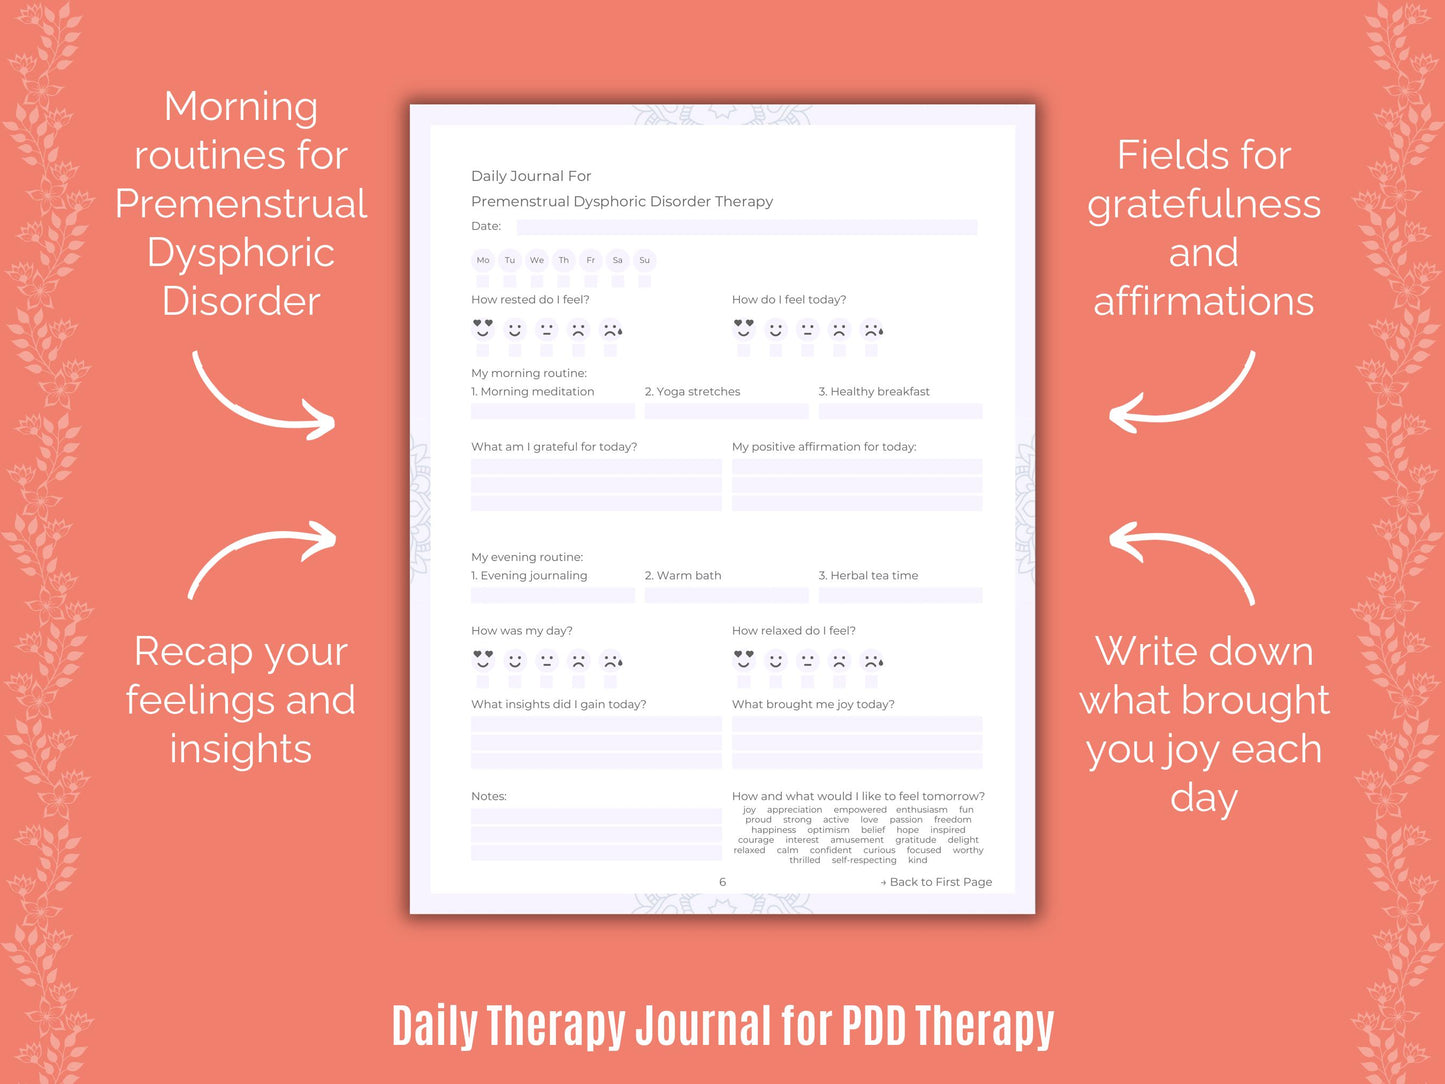 Counseling, Planners, Dysphoric, Premenstrual Notes, Journals, Disorder, Goal Setting, Workbooks, Premenstrual Tools, Premenstrual Therapy, Journaling, Templates, Cheat Sheet, Resources